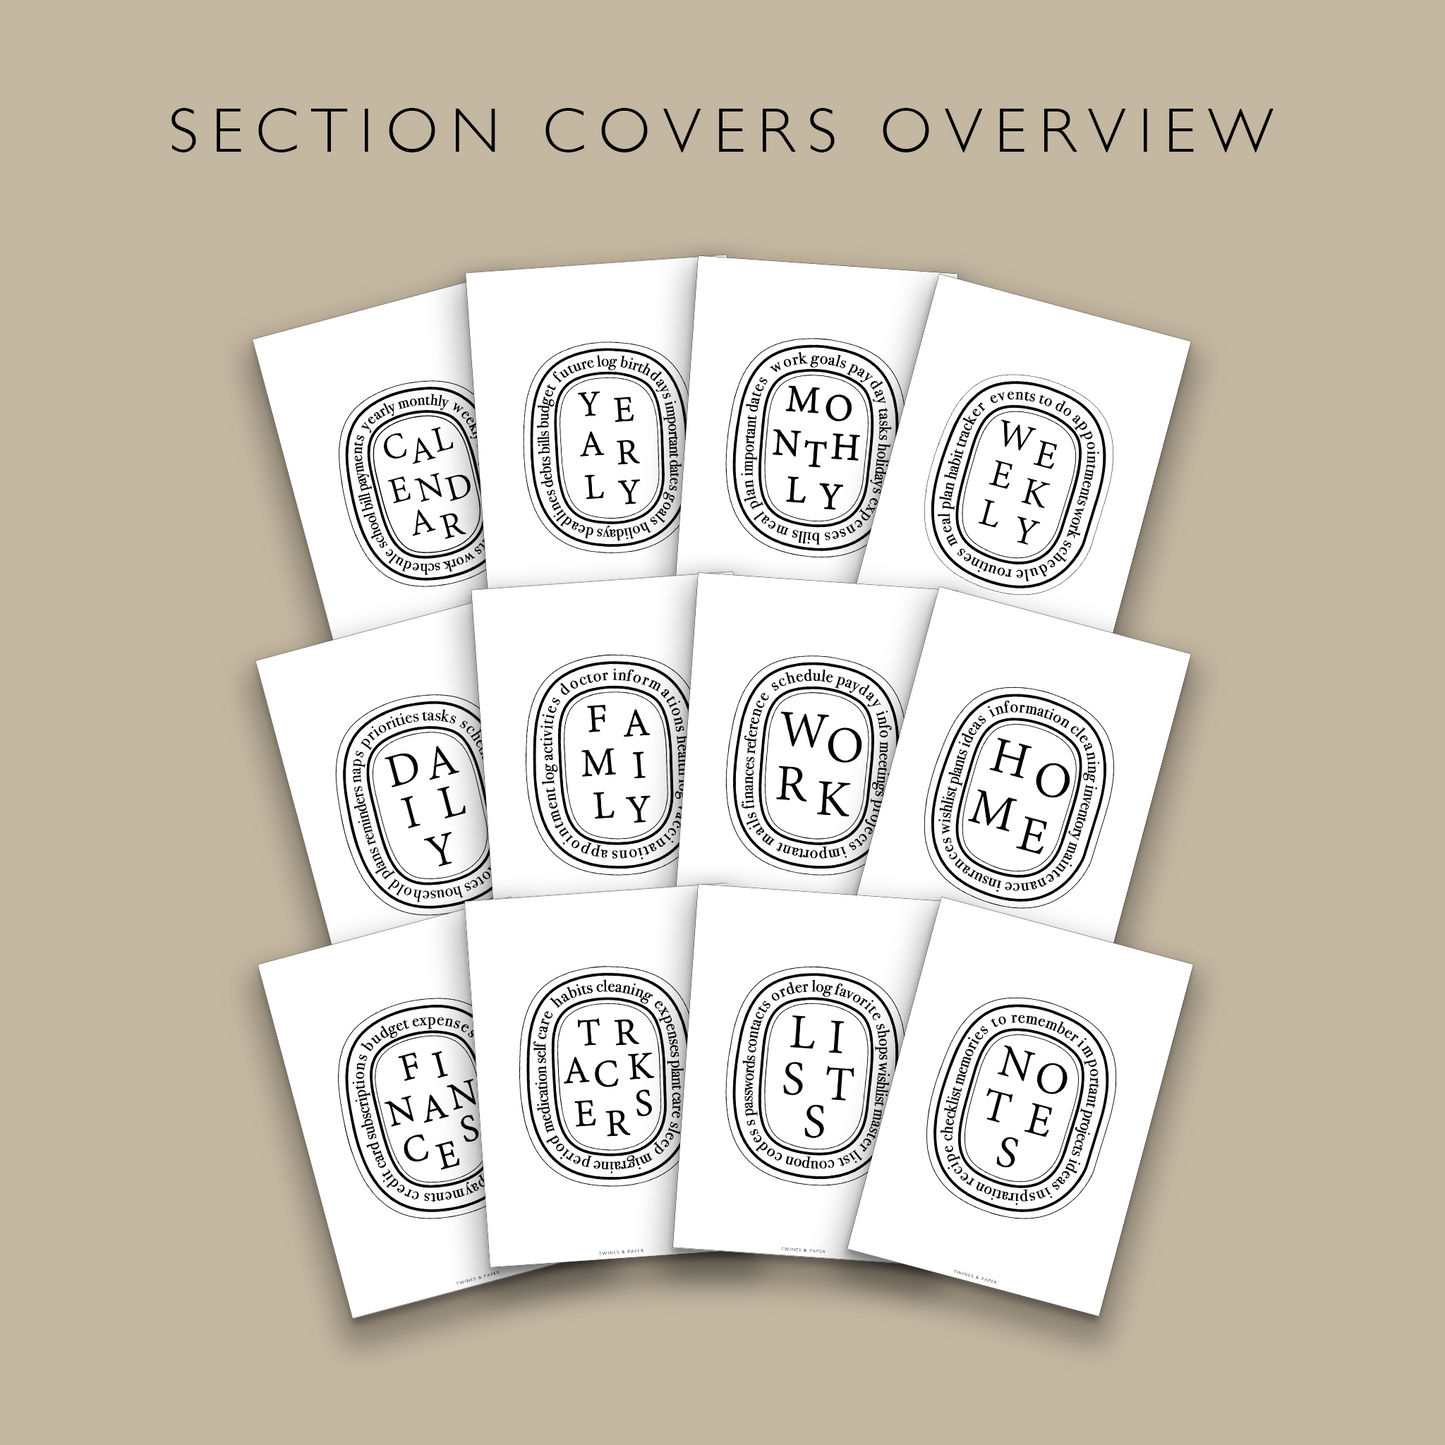 "Diptyque Inspired Section Covers" Printable Dashboards 13 Covers